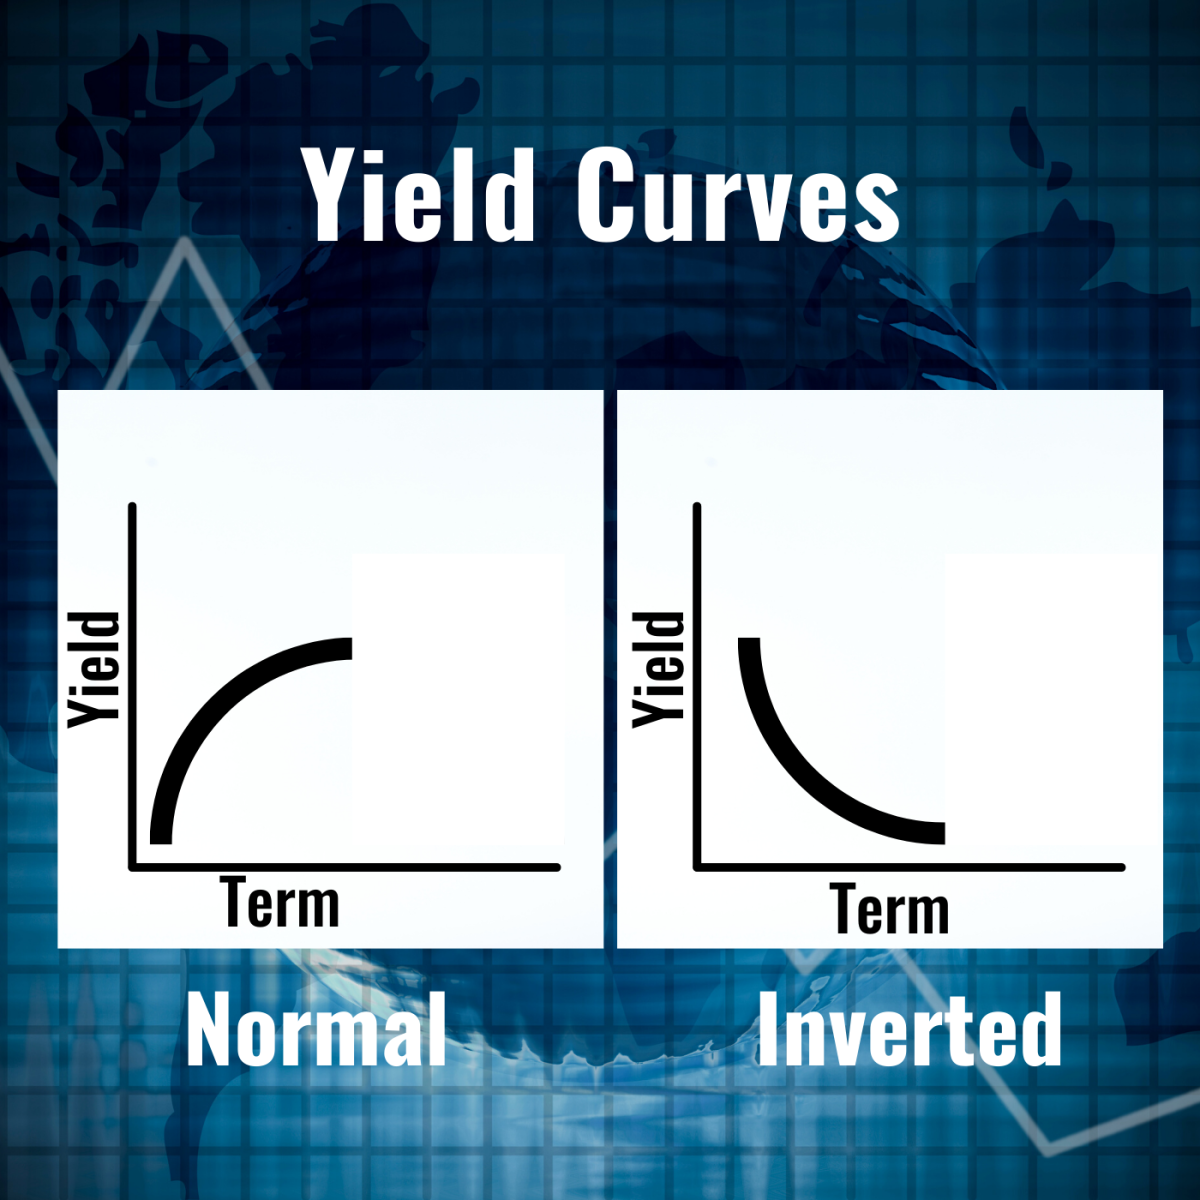 Two graphs; one showing a normal yield curve and one showing an inverted yield curve